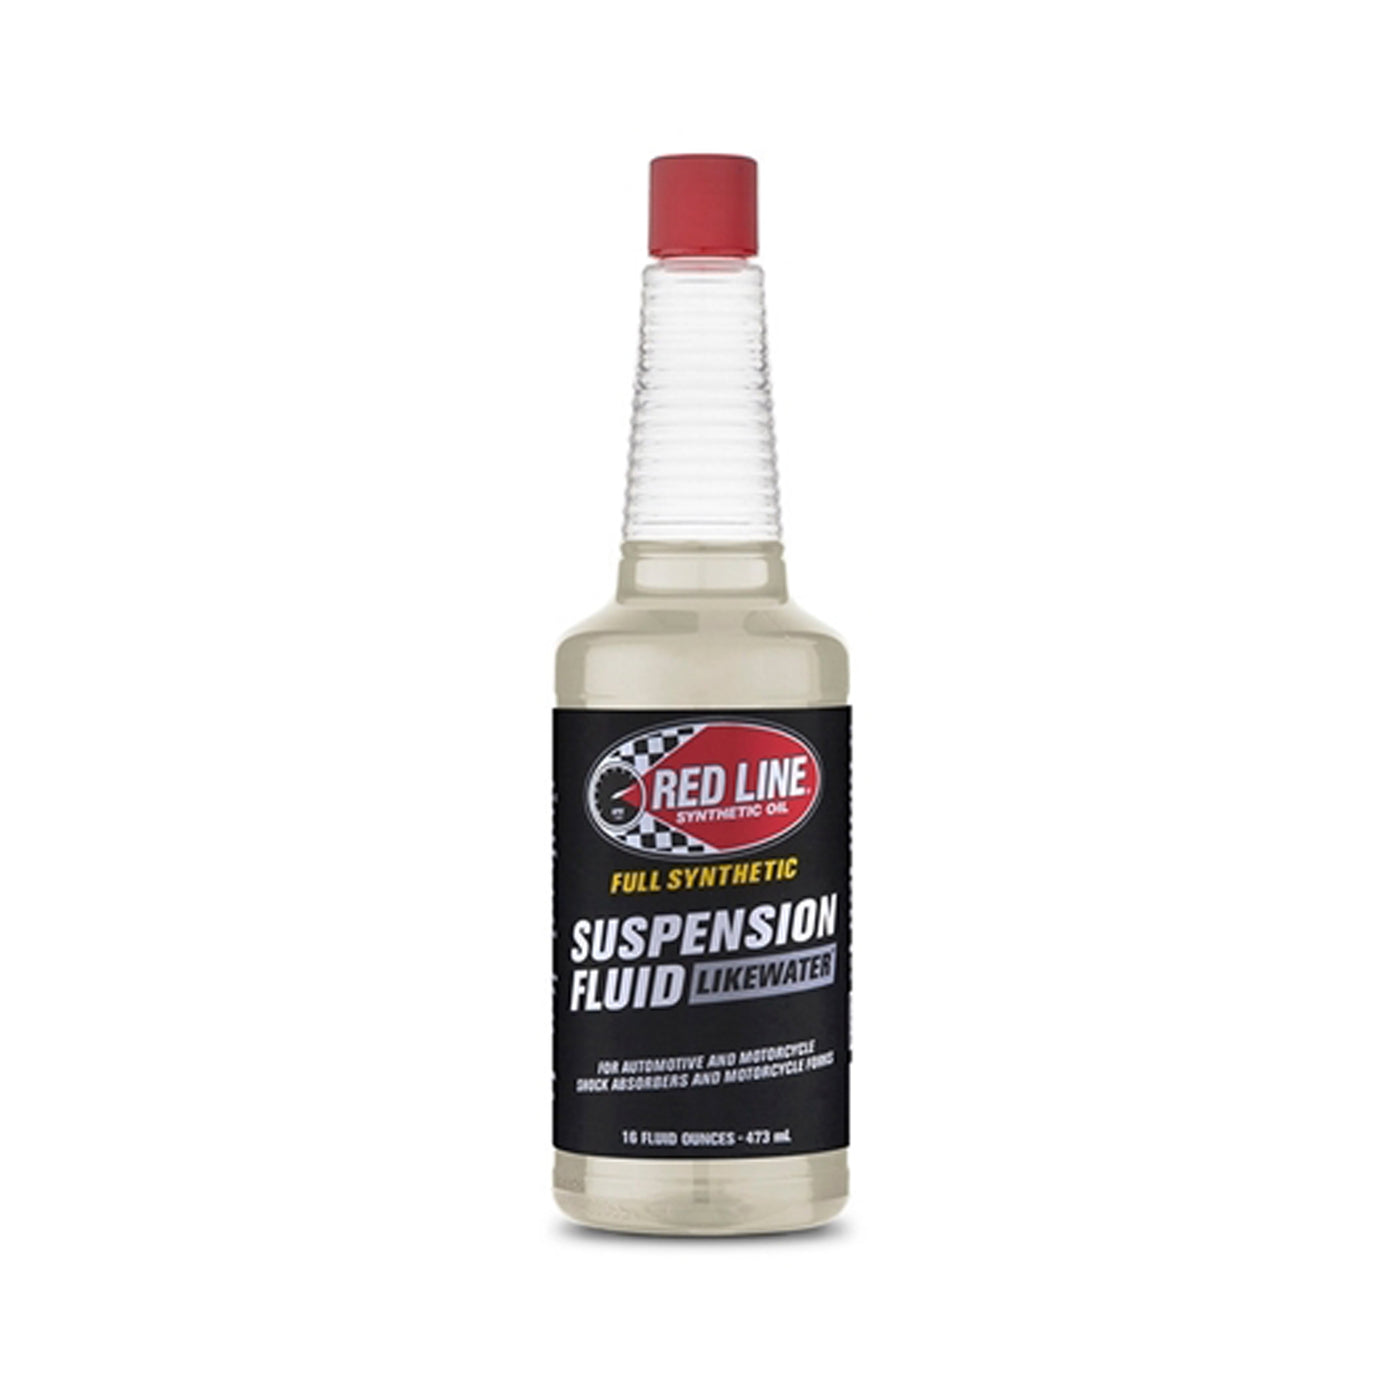 Red Line Suspension Fluid LikeWater (1.5WT)